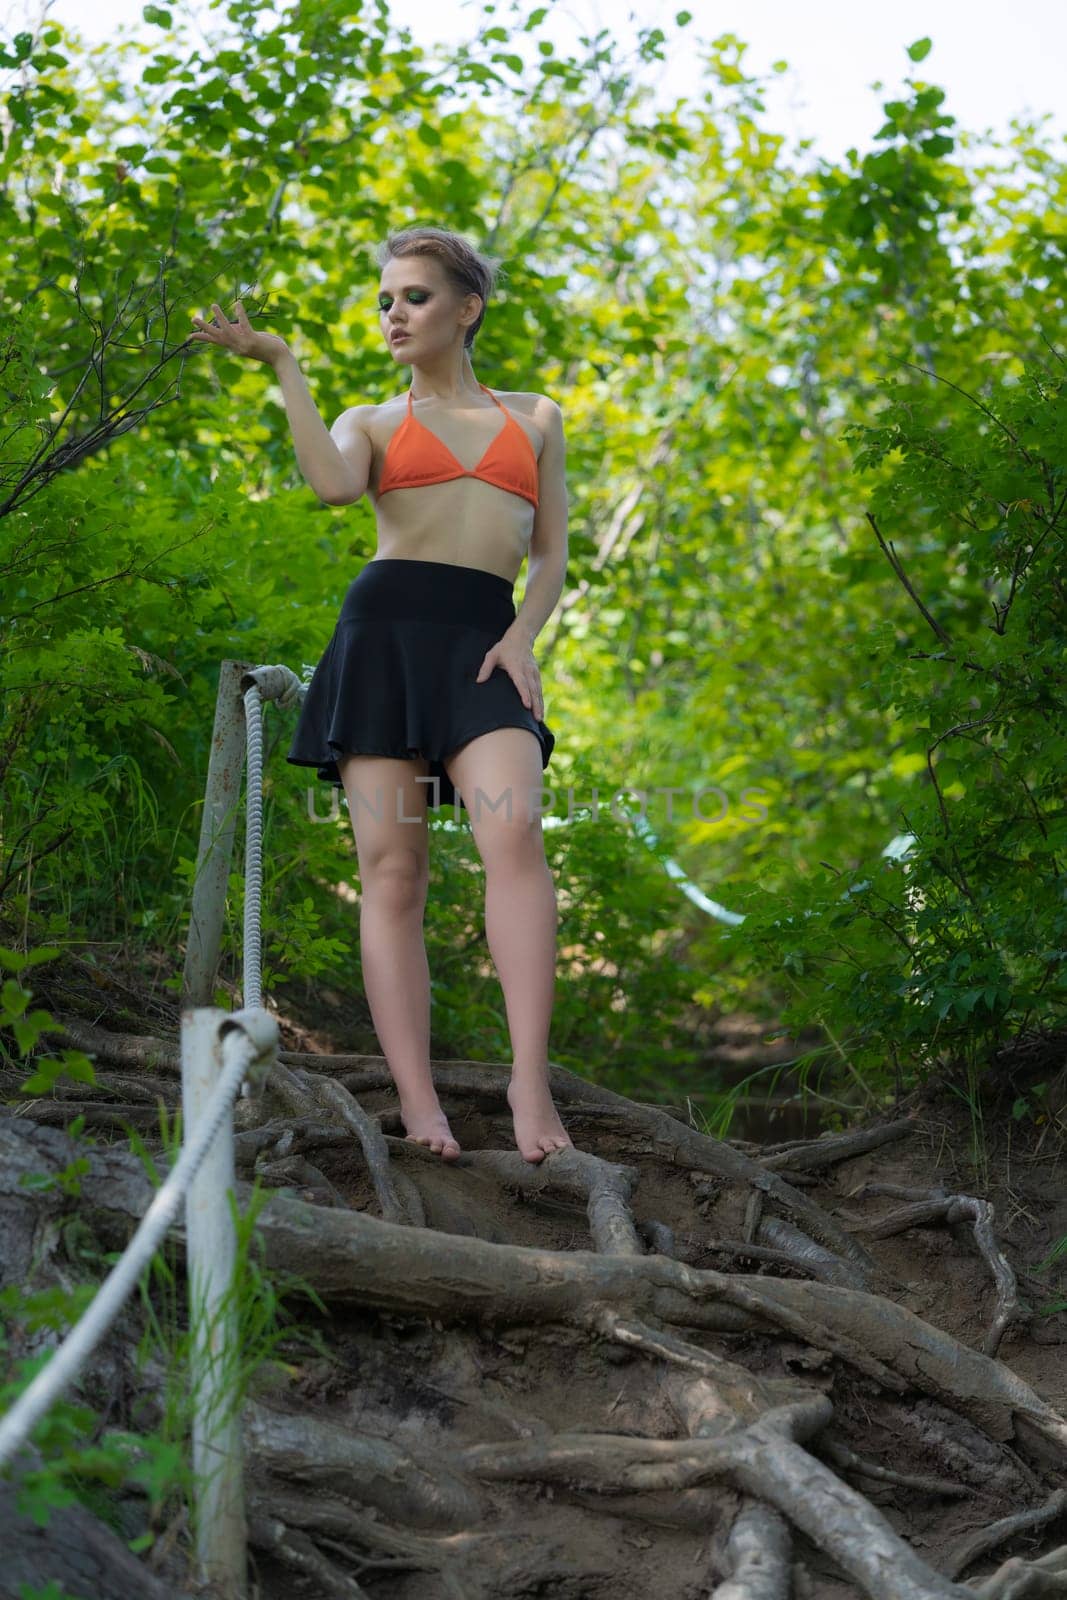 Caucasian woman standing and poses in forest on ladder made of tree roots. Sensuality adult female dressed in orange bikini top and mini skirt. Blonde model with short hair and bright make-up